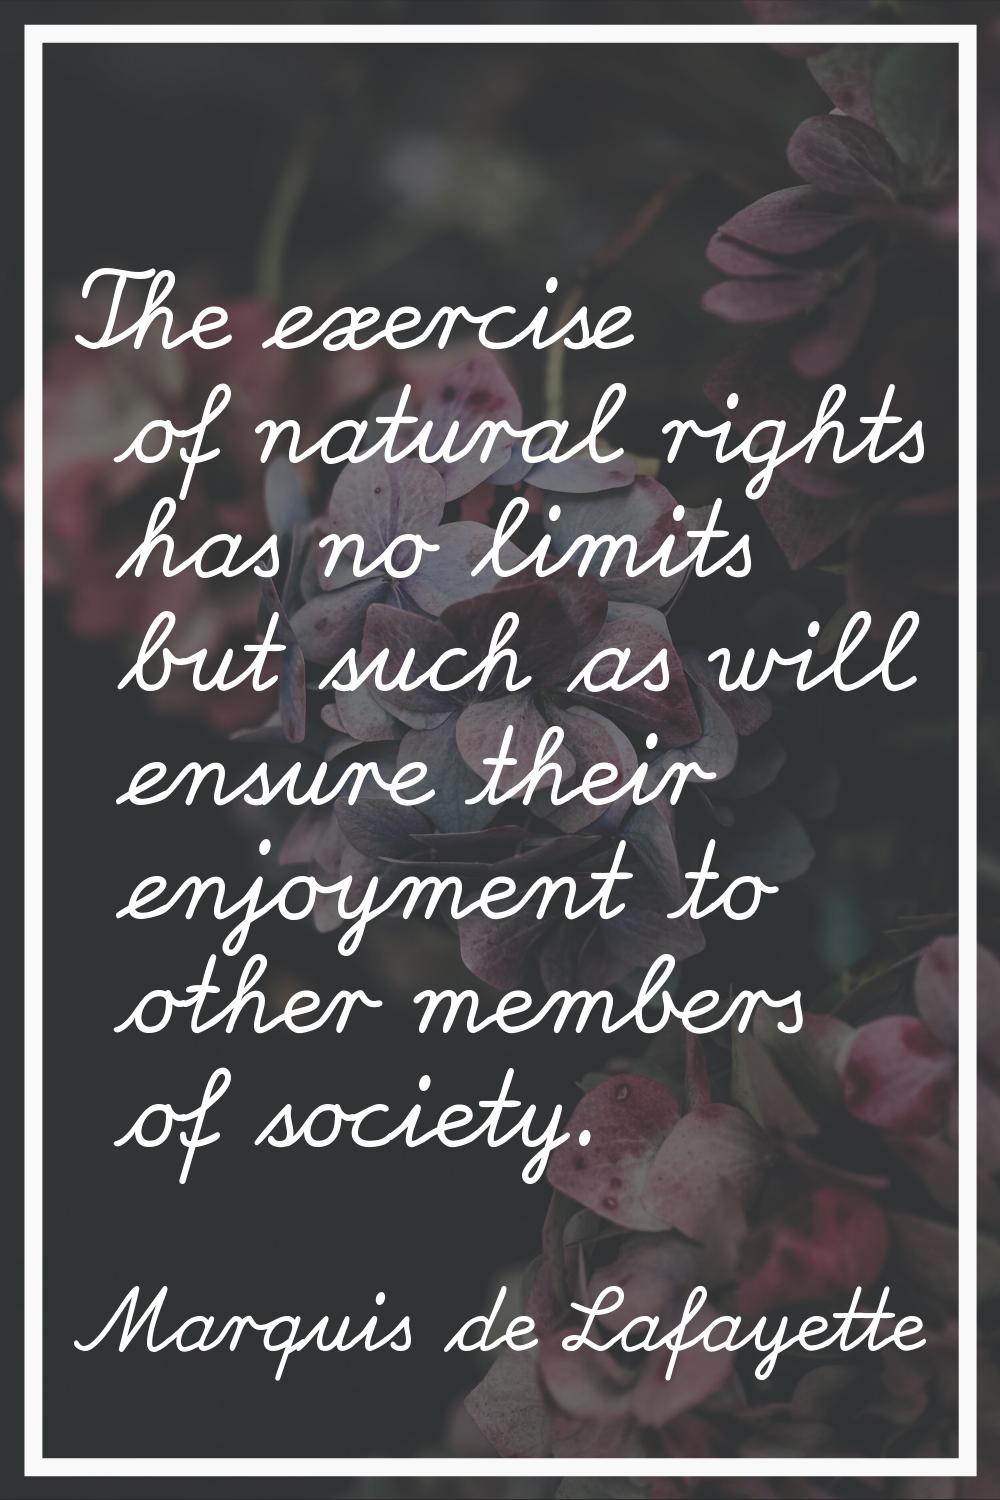 The exercise of natural rights has no limits but such as will ensure their enjoyment to other membe